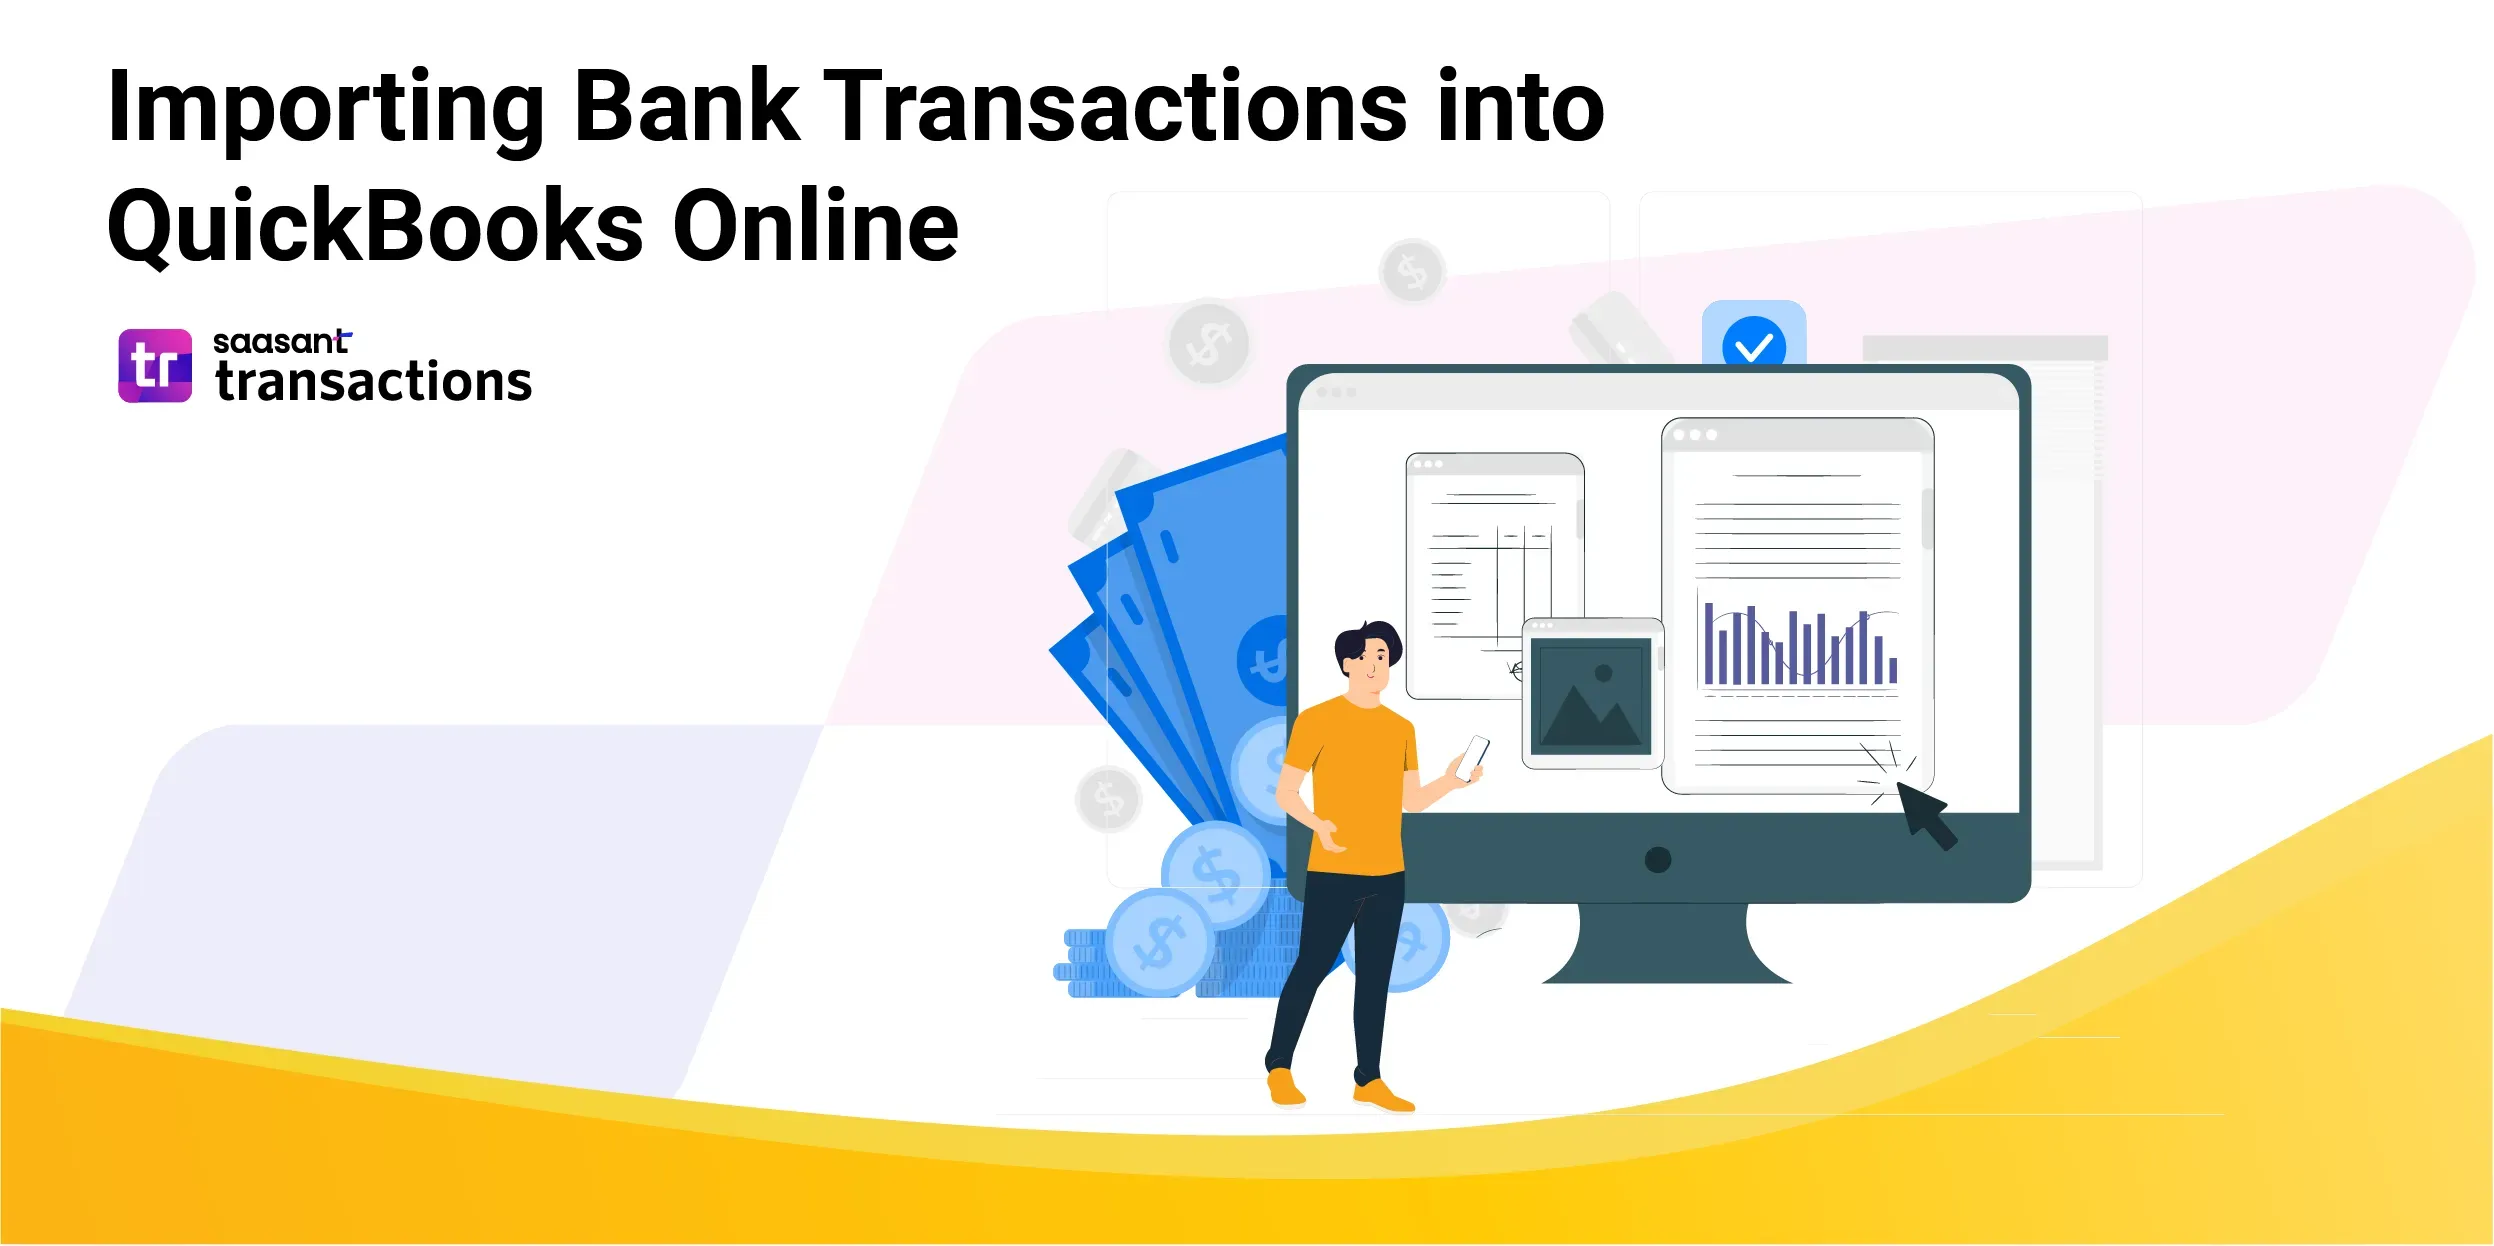 Importing Bank Transactions into QuickBooks Online